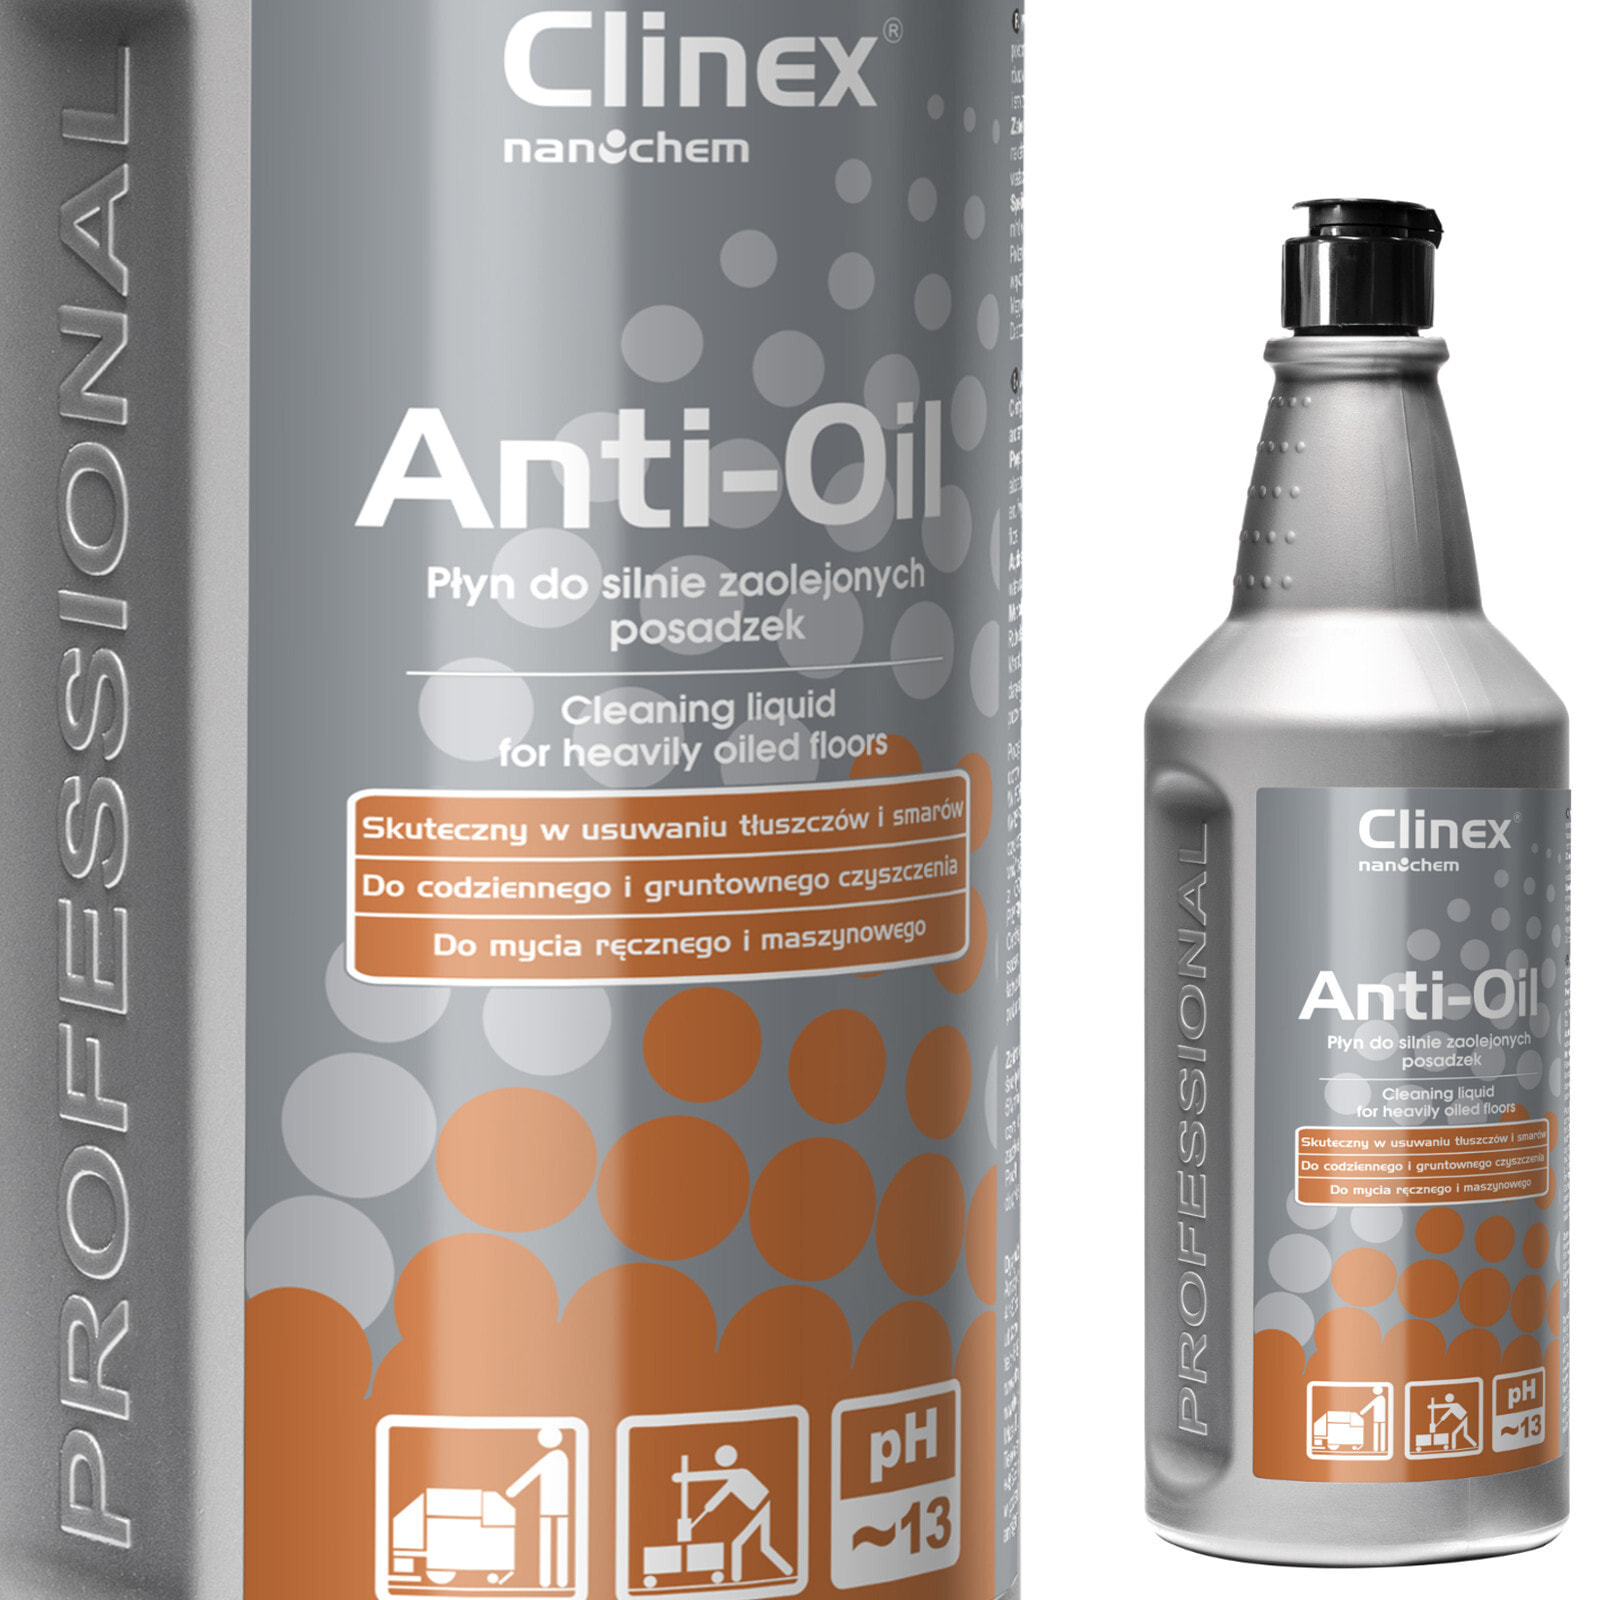 CLINEX Anti-Oil 1L liquid for cleaning heavily oiled floors